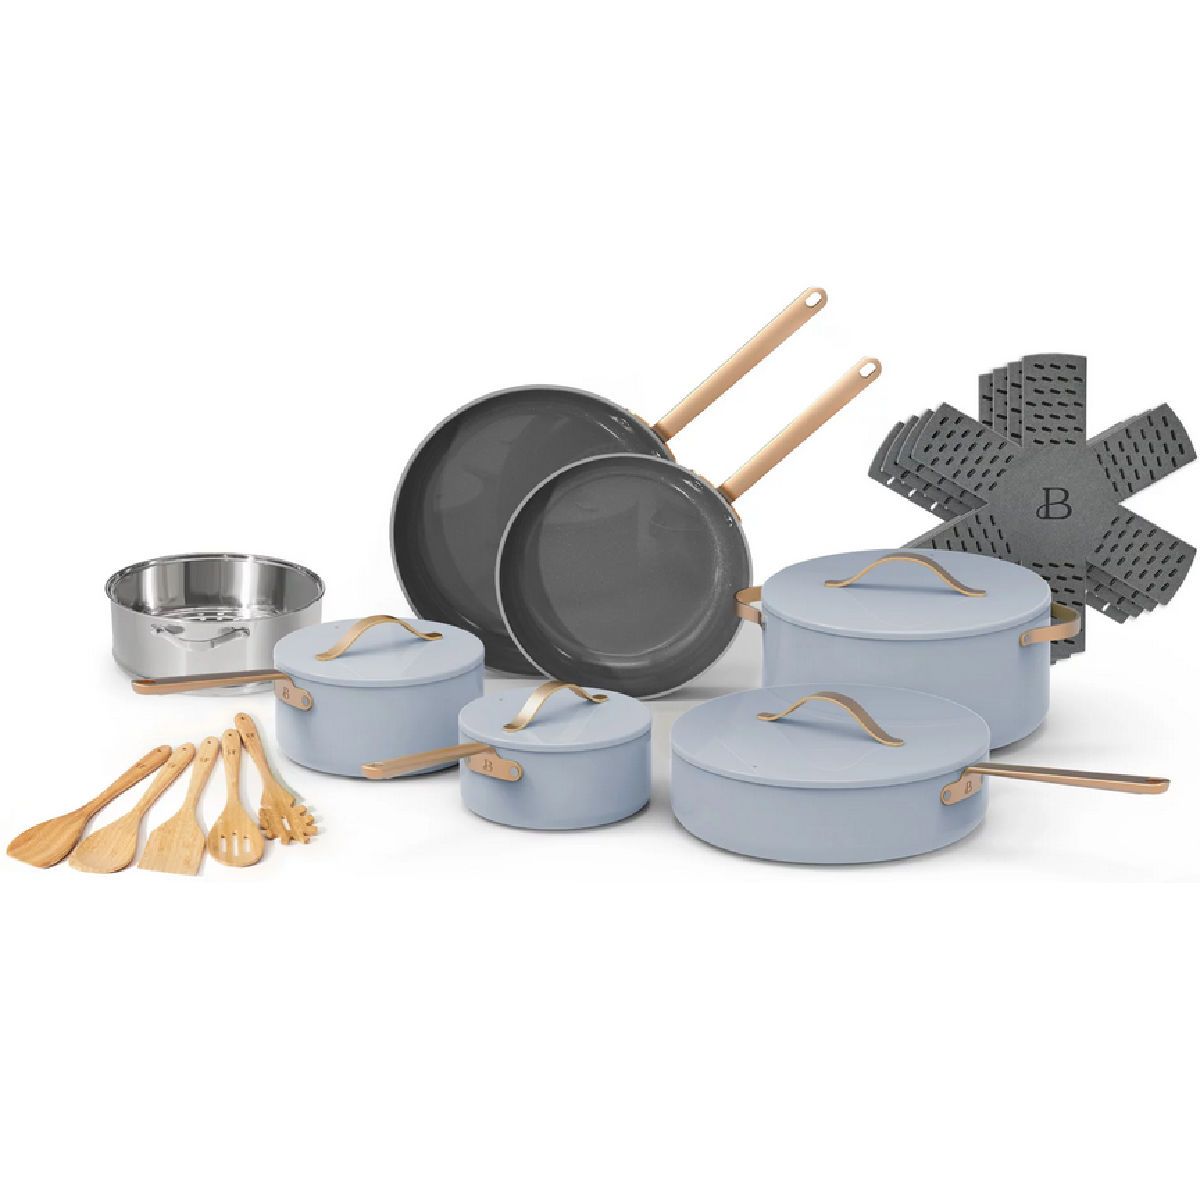 Beautiful by Drew Barrymore 20pc Ceramic Non-Stick Cookware Set